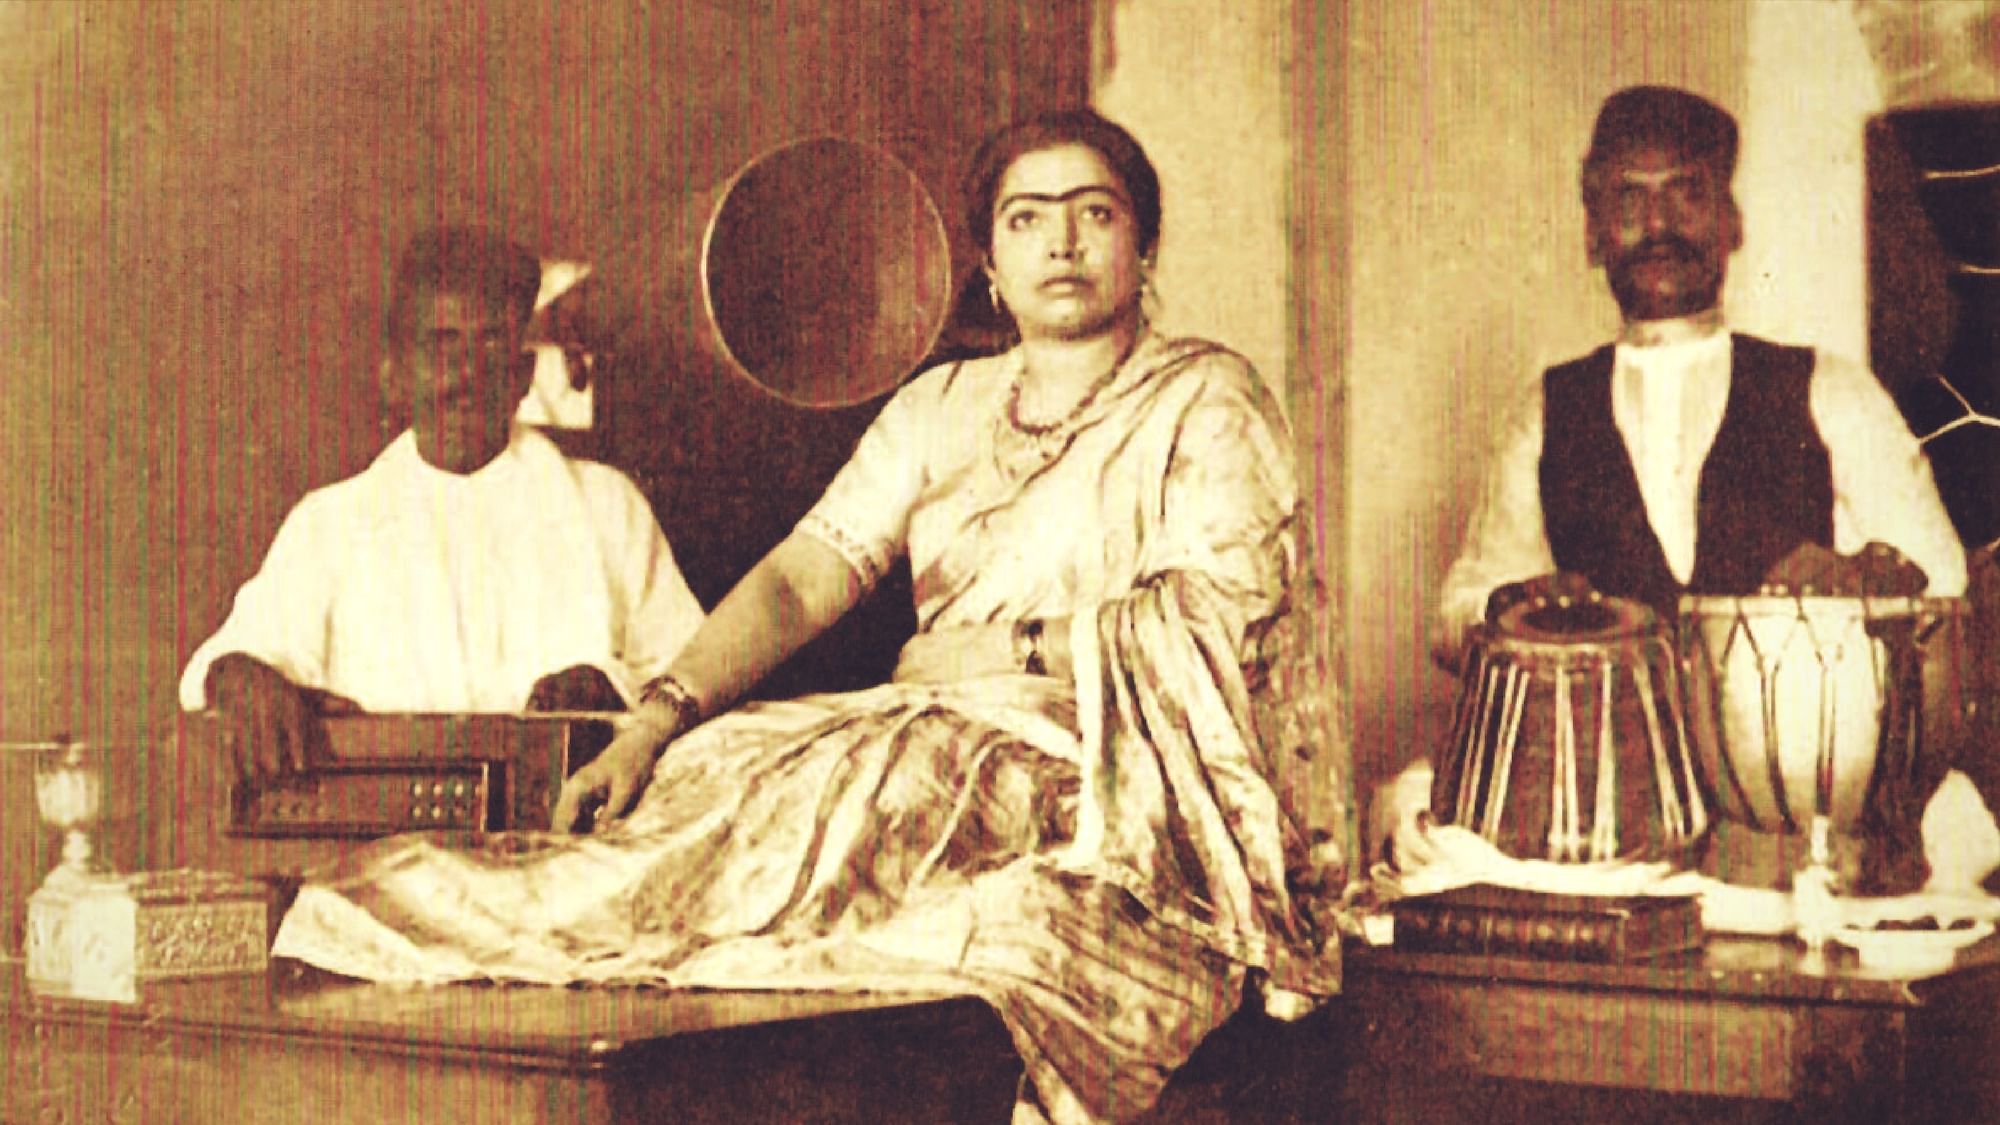 An old photograph of Gauhar Jan, the famed vocalist.